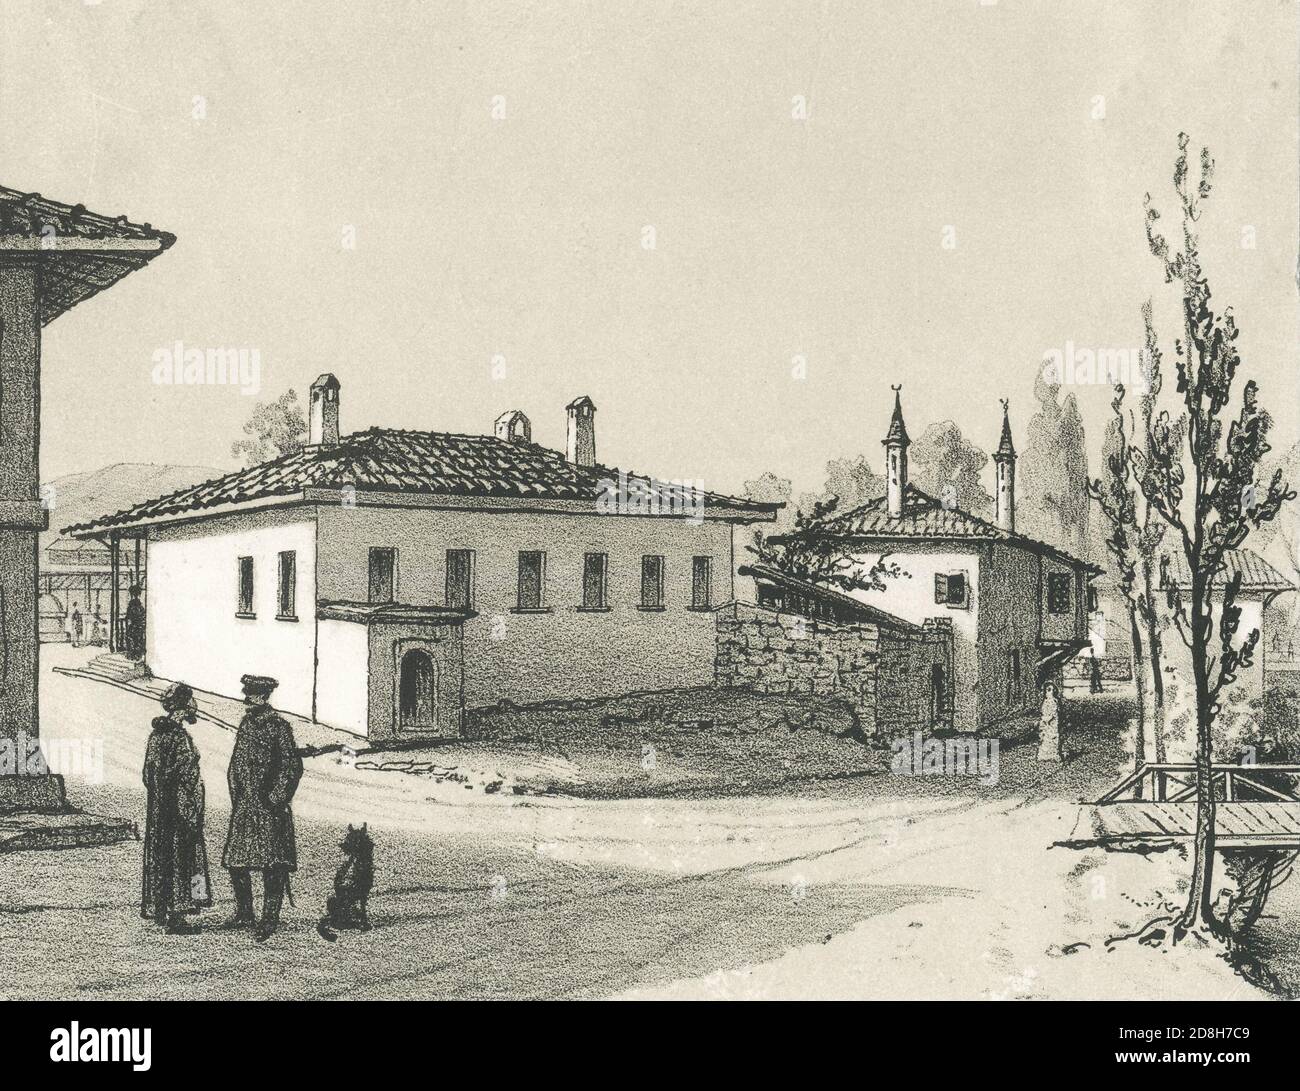 Street in Bakhchisarai during the Crimean War (1854-1855). Lithograph, 19th century. Stock Photo